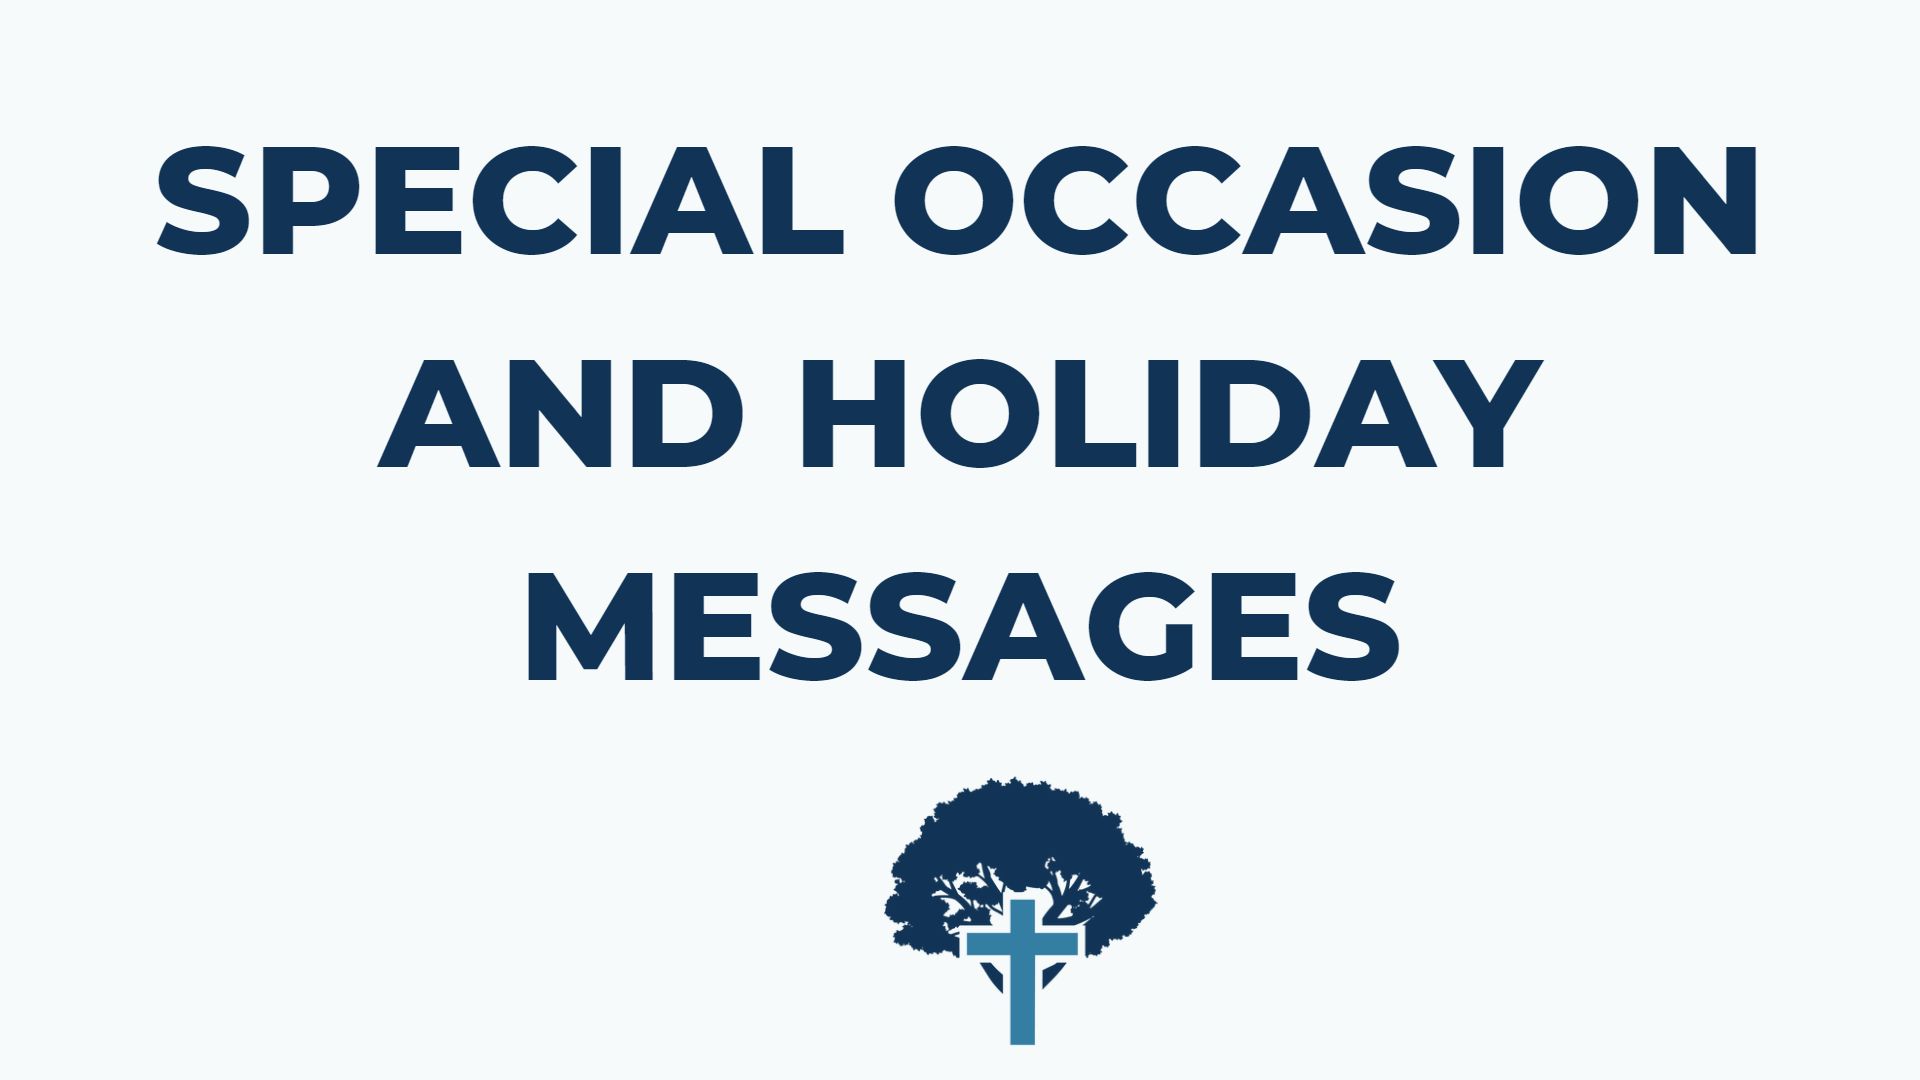 SPECIAL OCCASION AND HOLIDAY MESSAGE